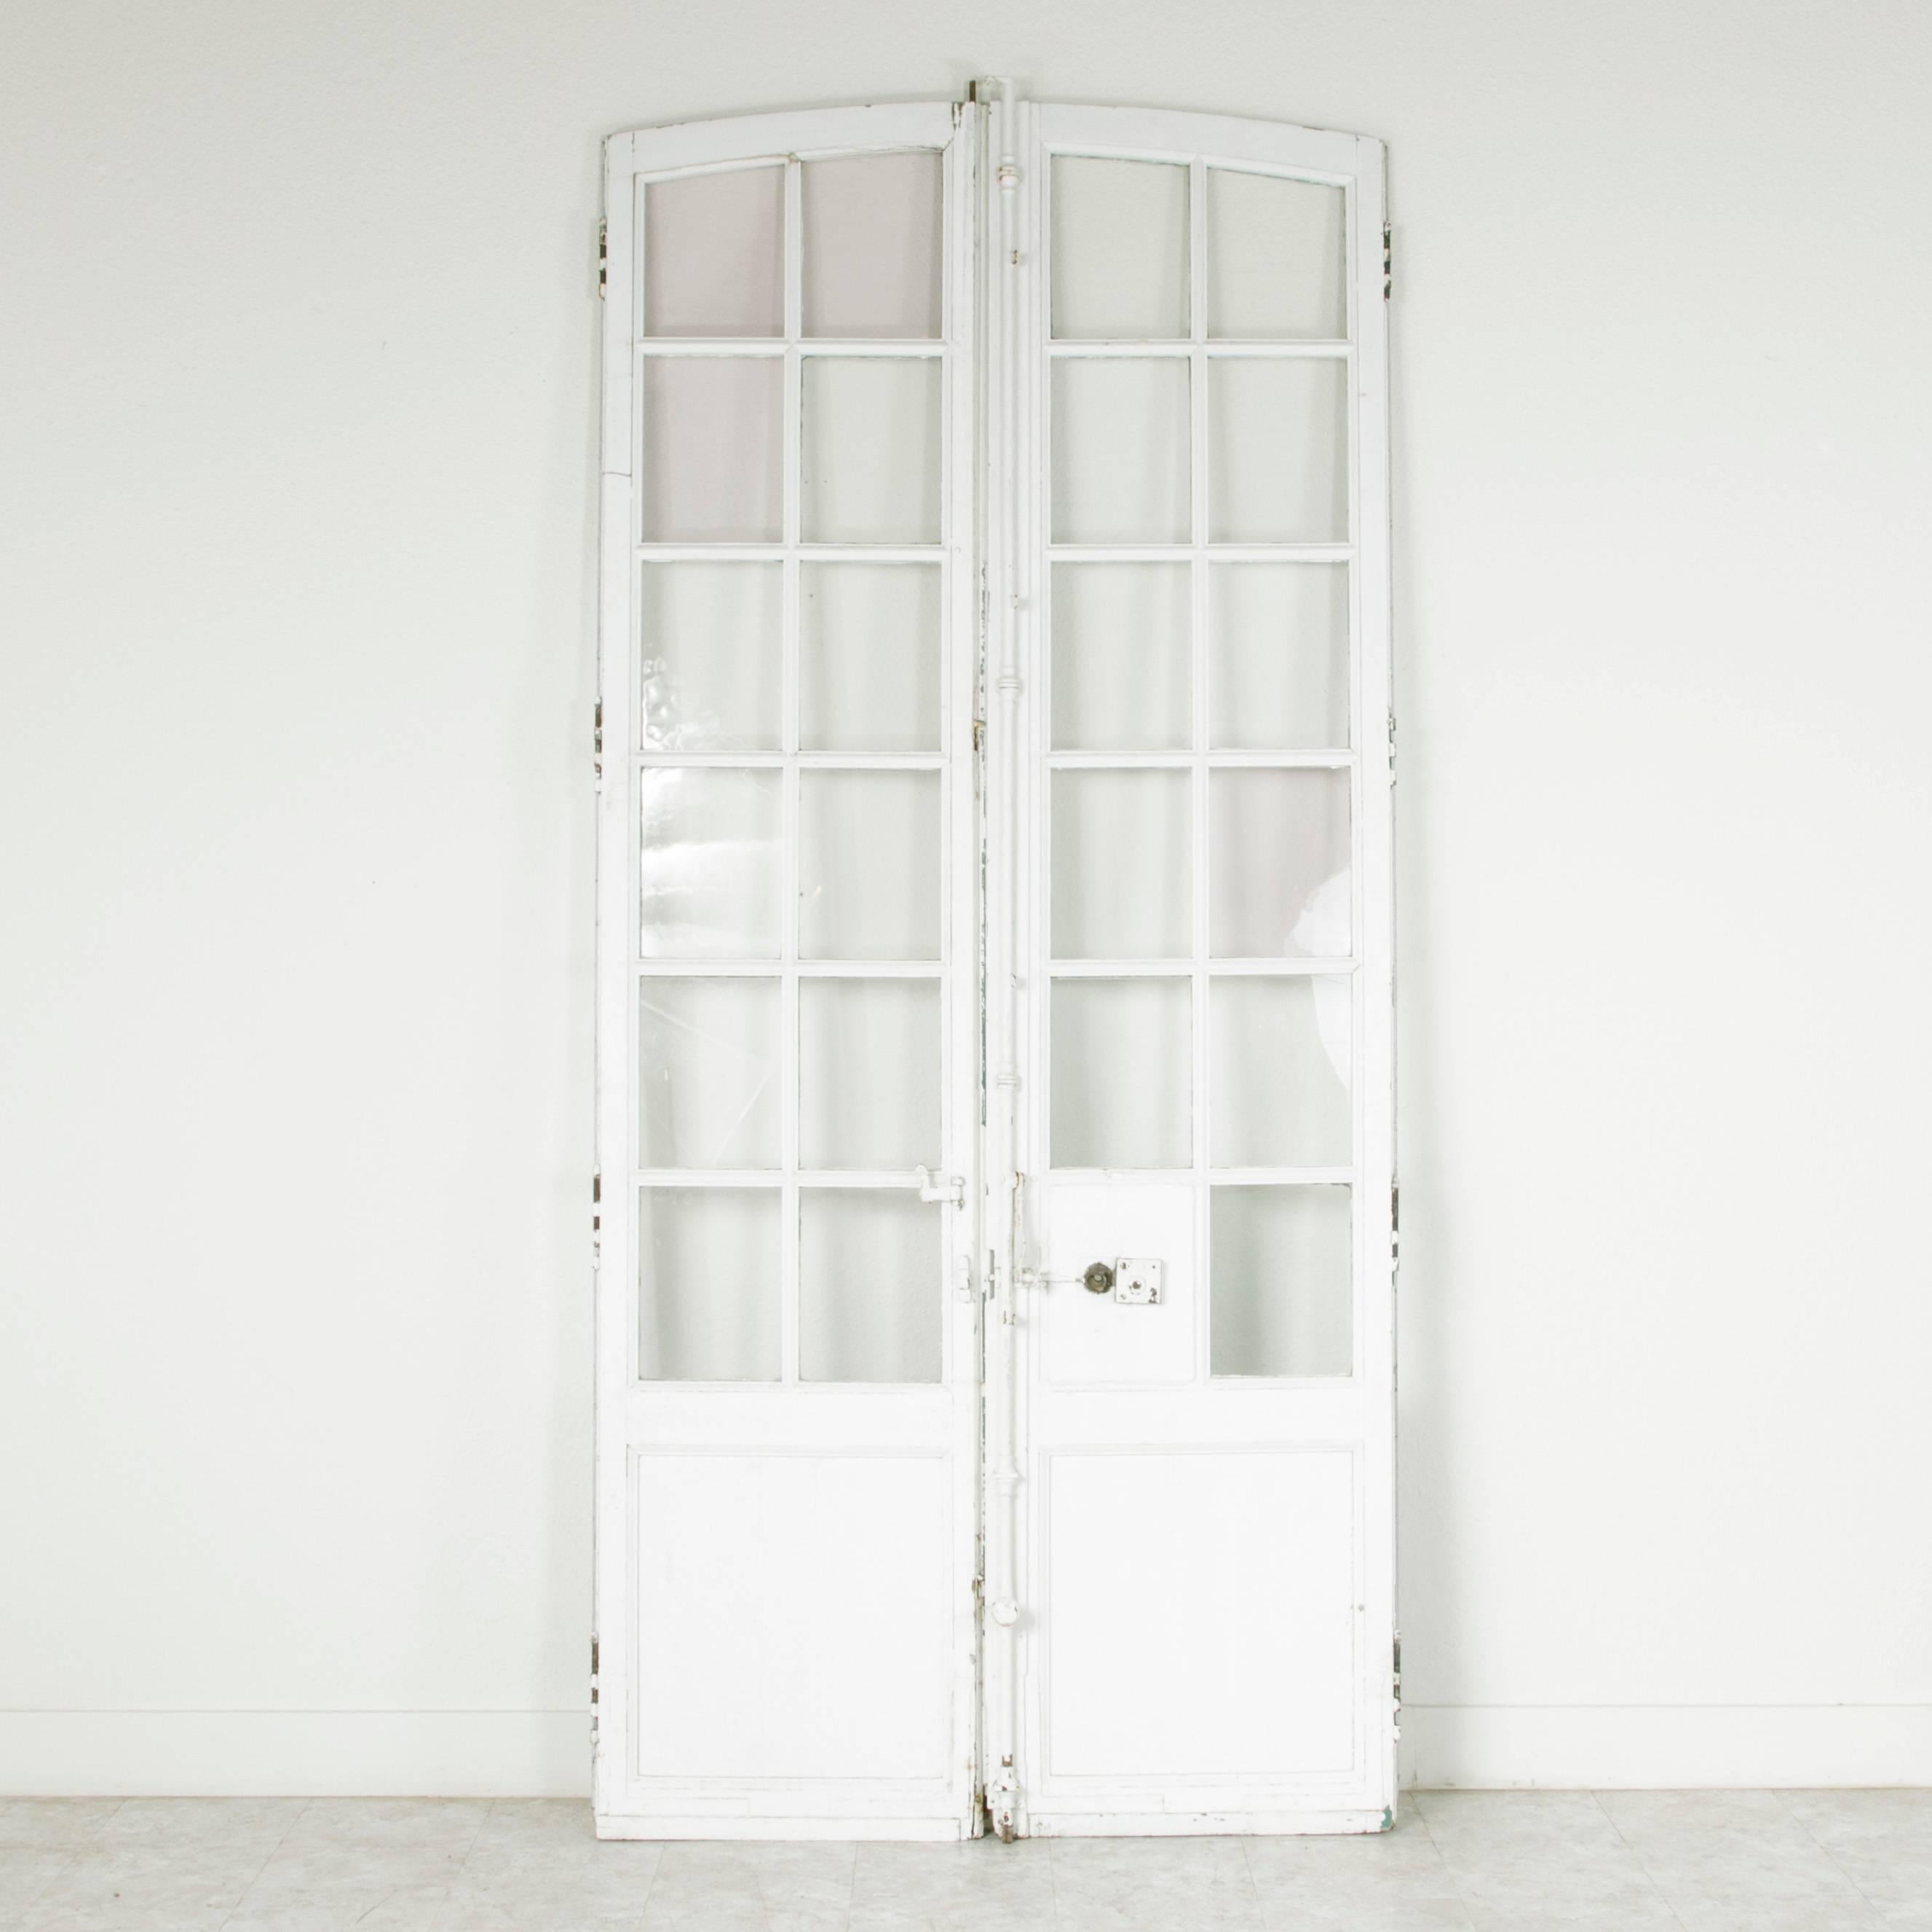 This stunning pair of doors were originally designed to hang in a French chateau, circa 1780. Each door is constructed of solid hand pegged wood painted in white and features 12 panes of original handblown glass. Their arched top stands at almost 10